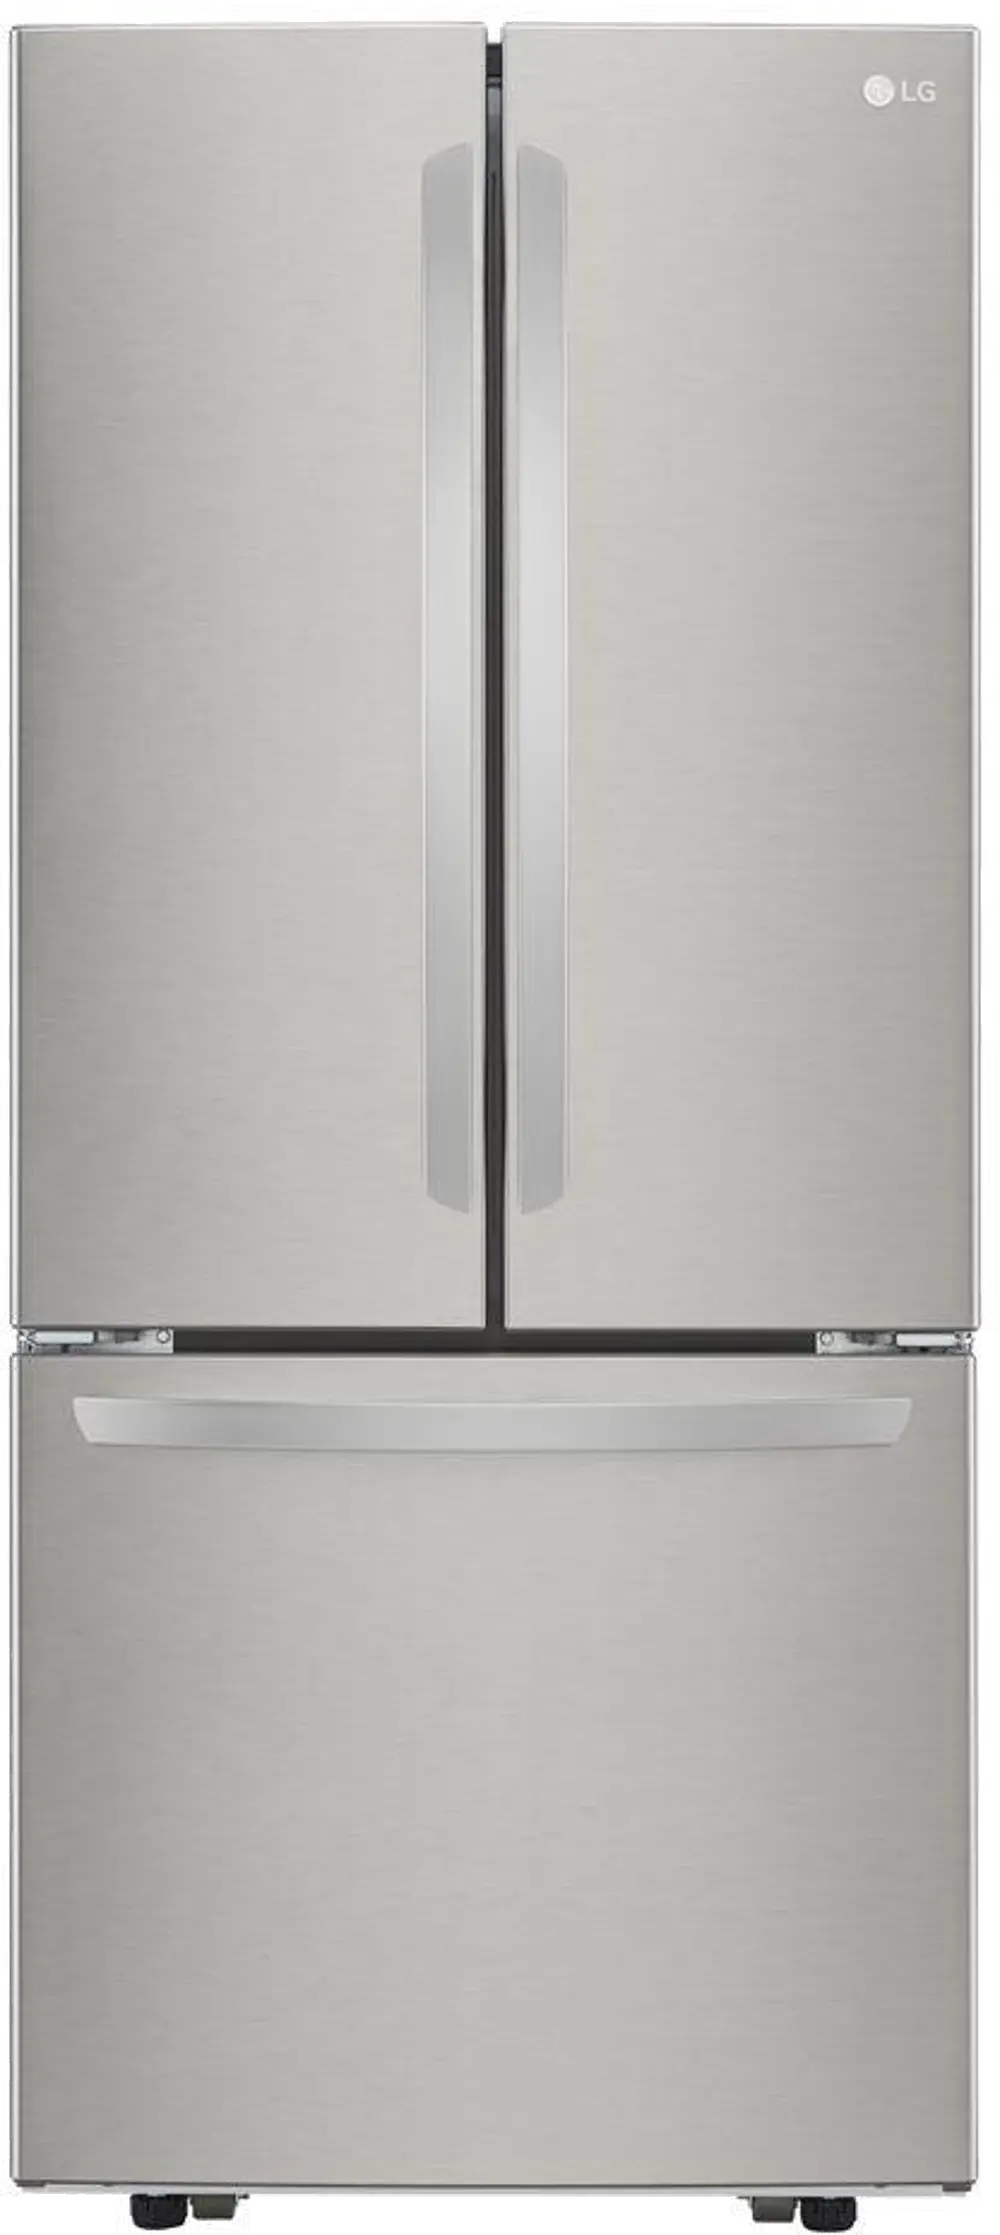 LFCS22520S LG 21.8 cu ft French Door Refrigerator - 30 W Stainless Steel-1